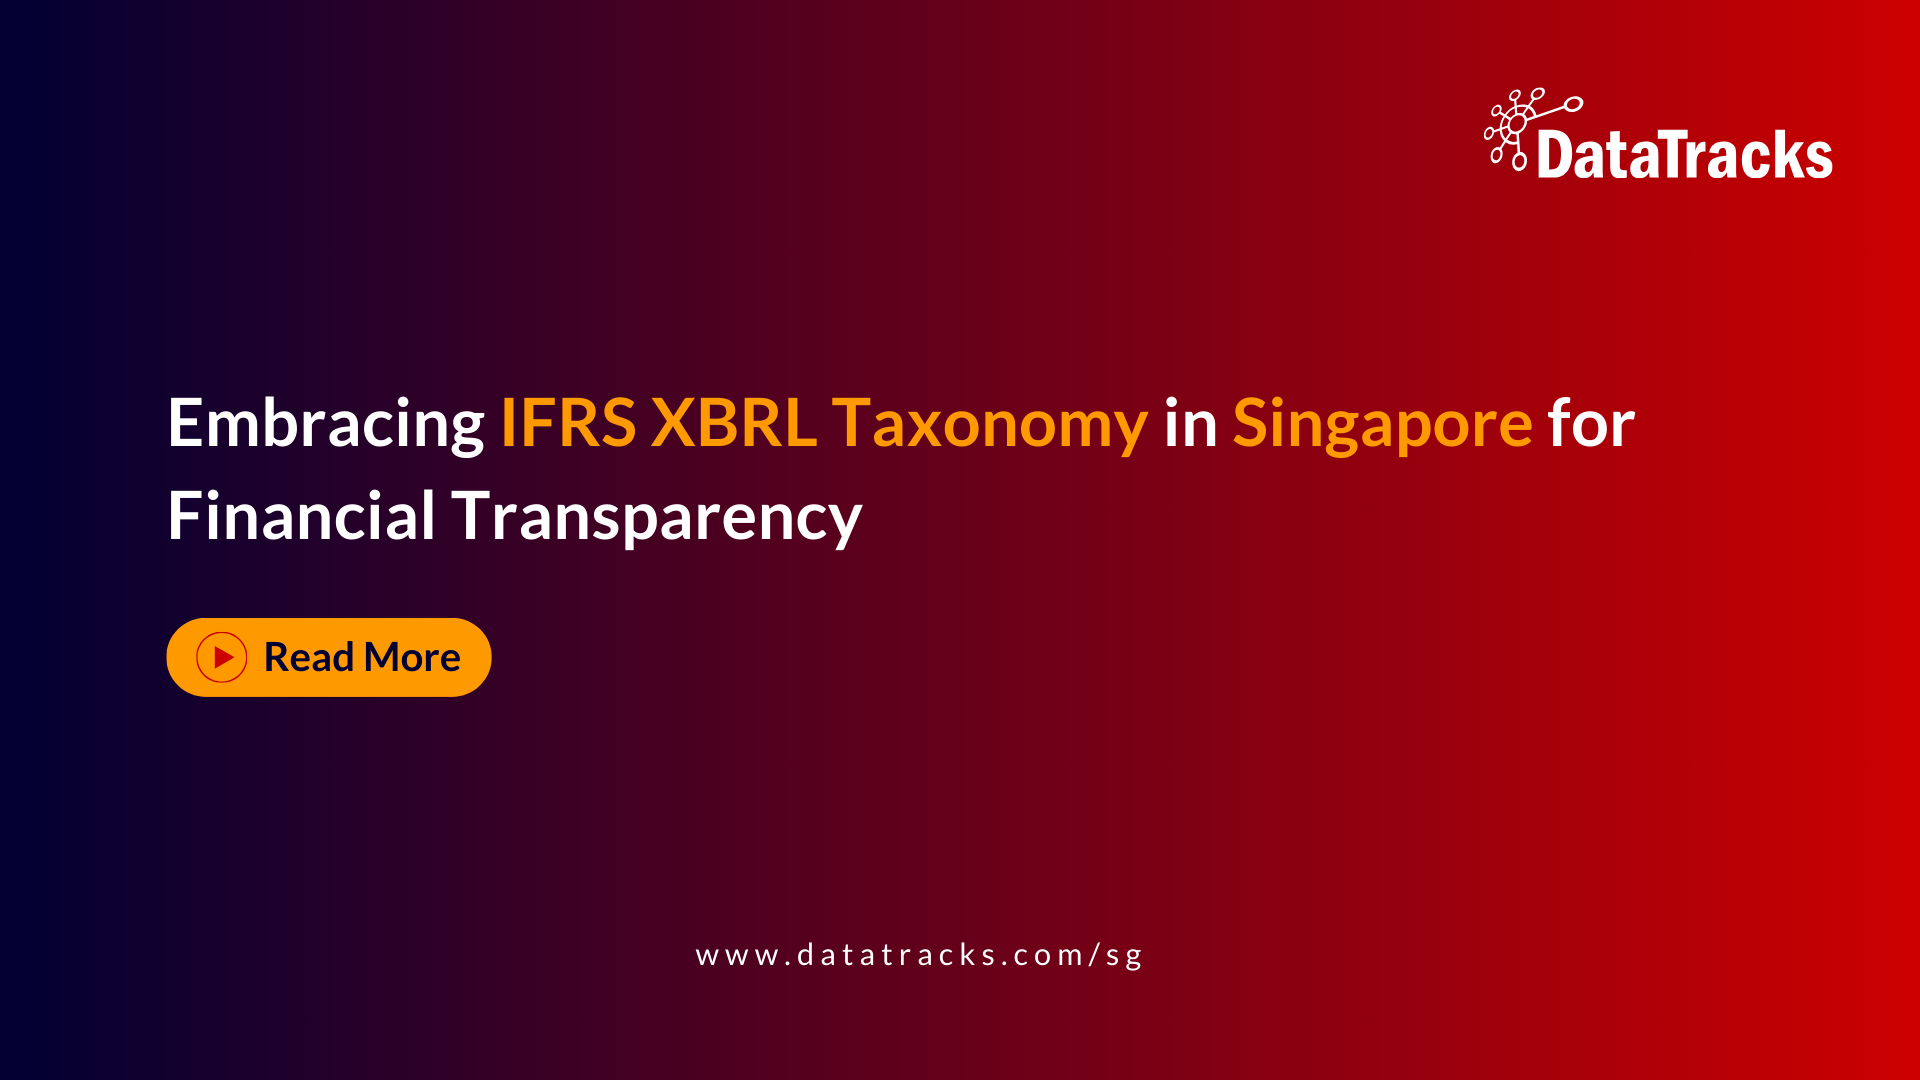 Embracing IFRS in Singapore: A Leap Towards Enhanced Financial Transparency and XBRL Taxonomy